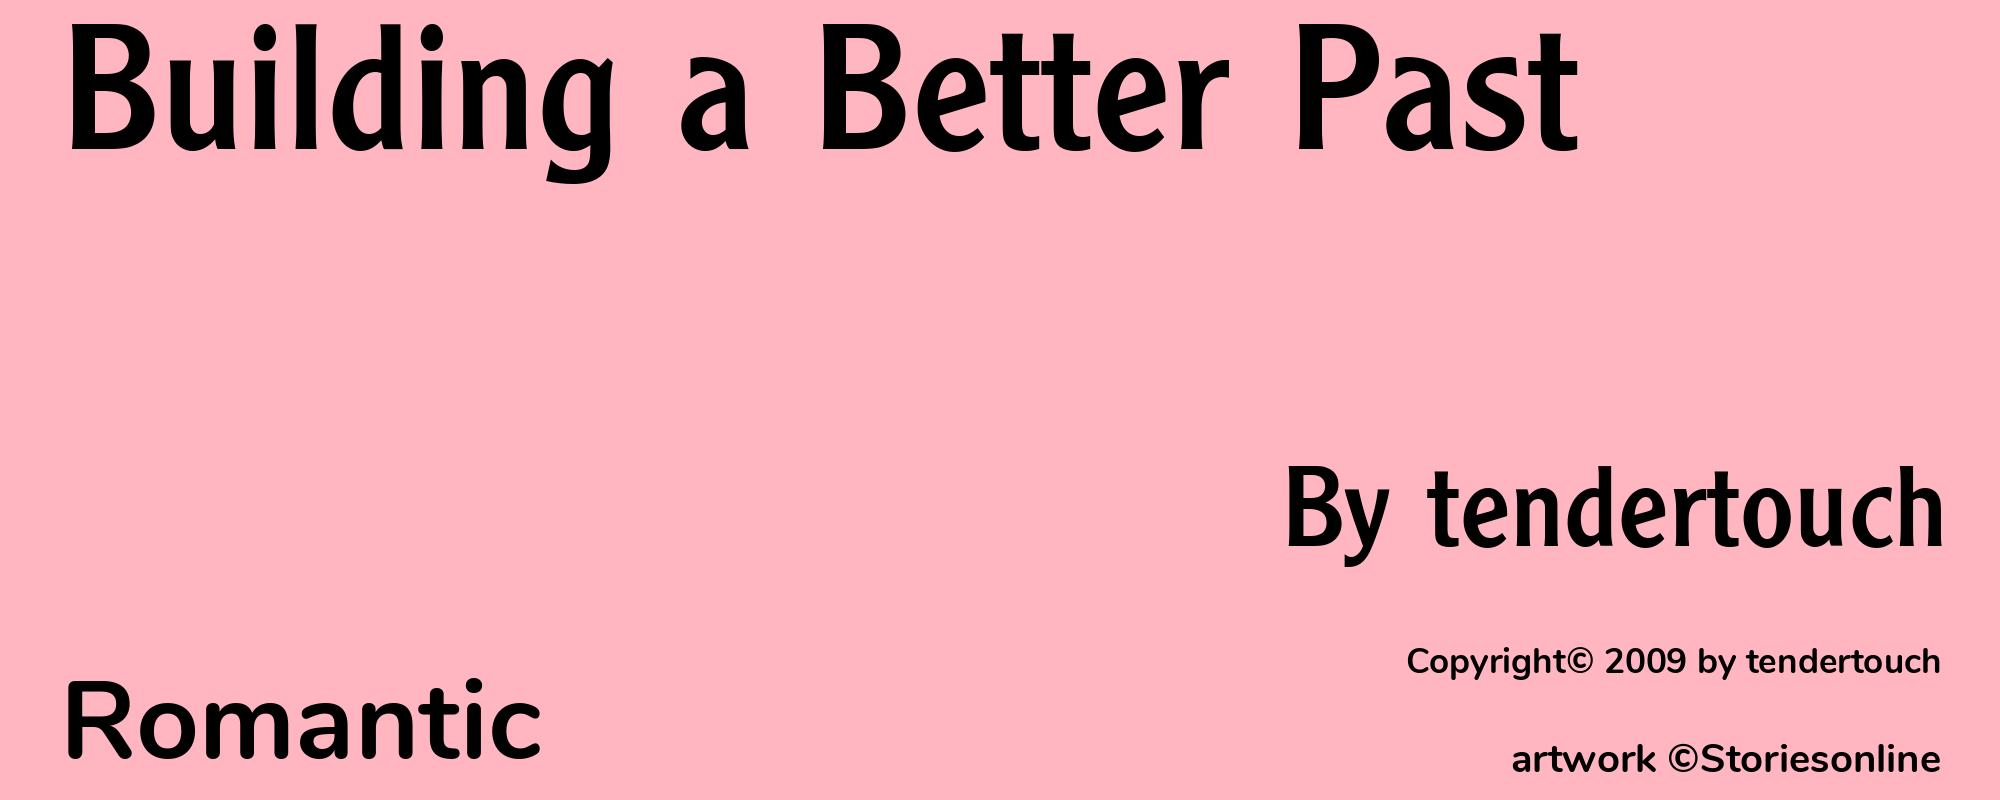 Building a Better Past - Cover